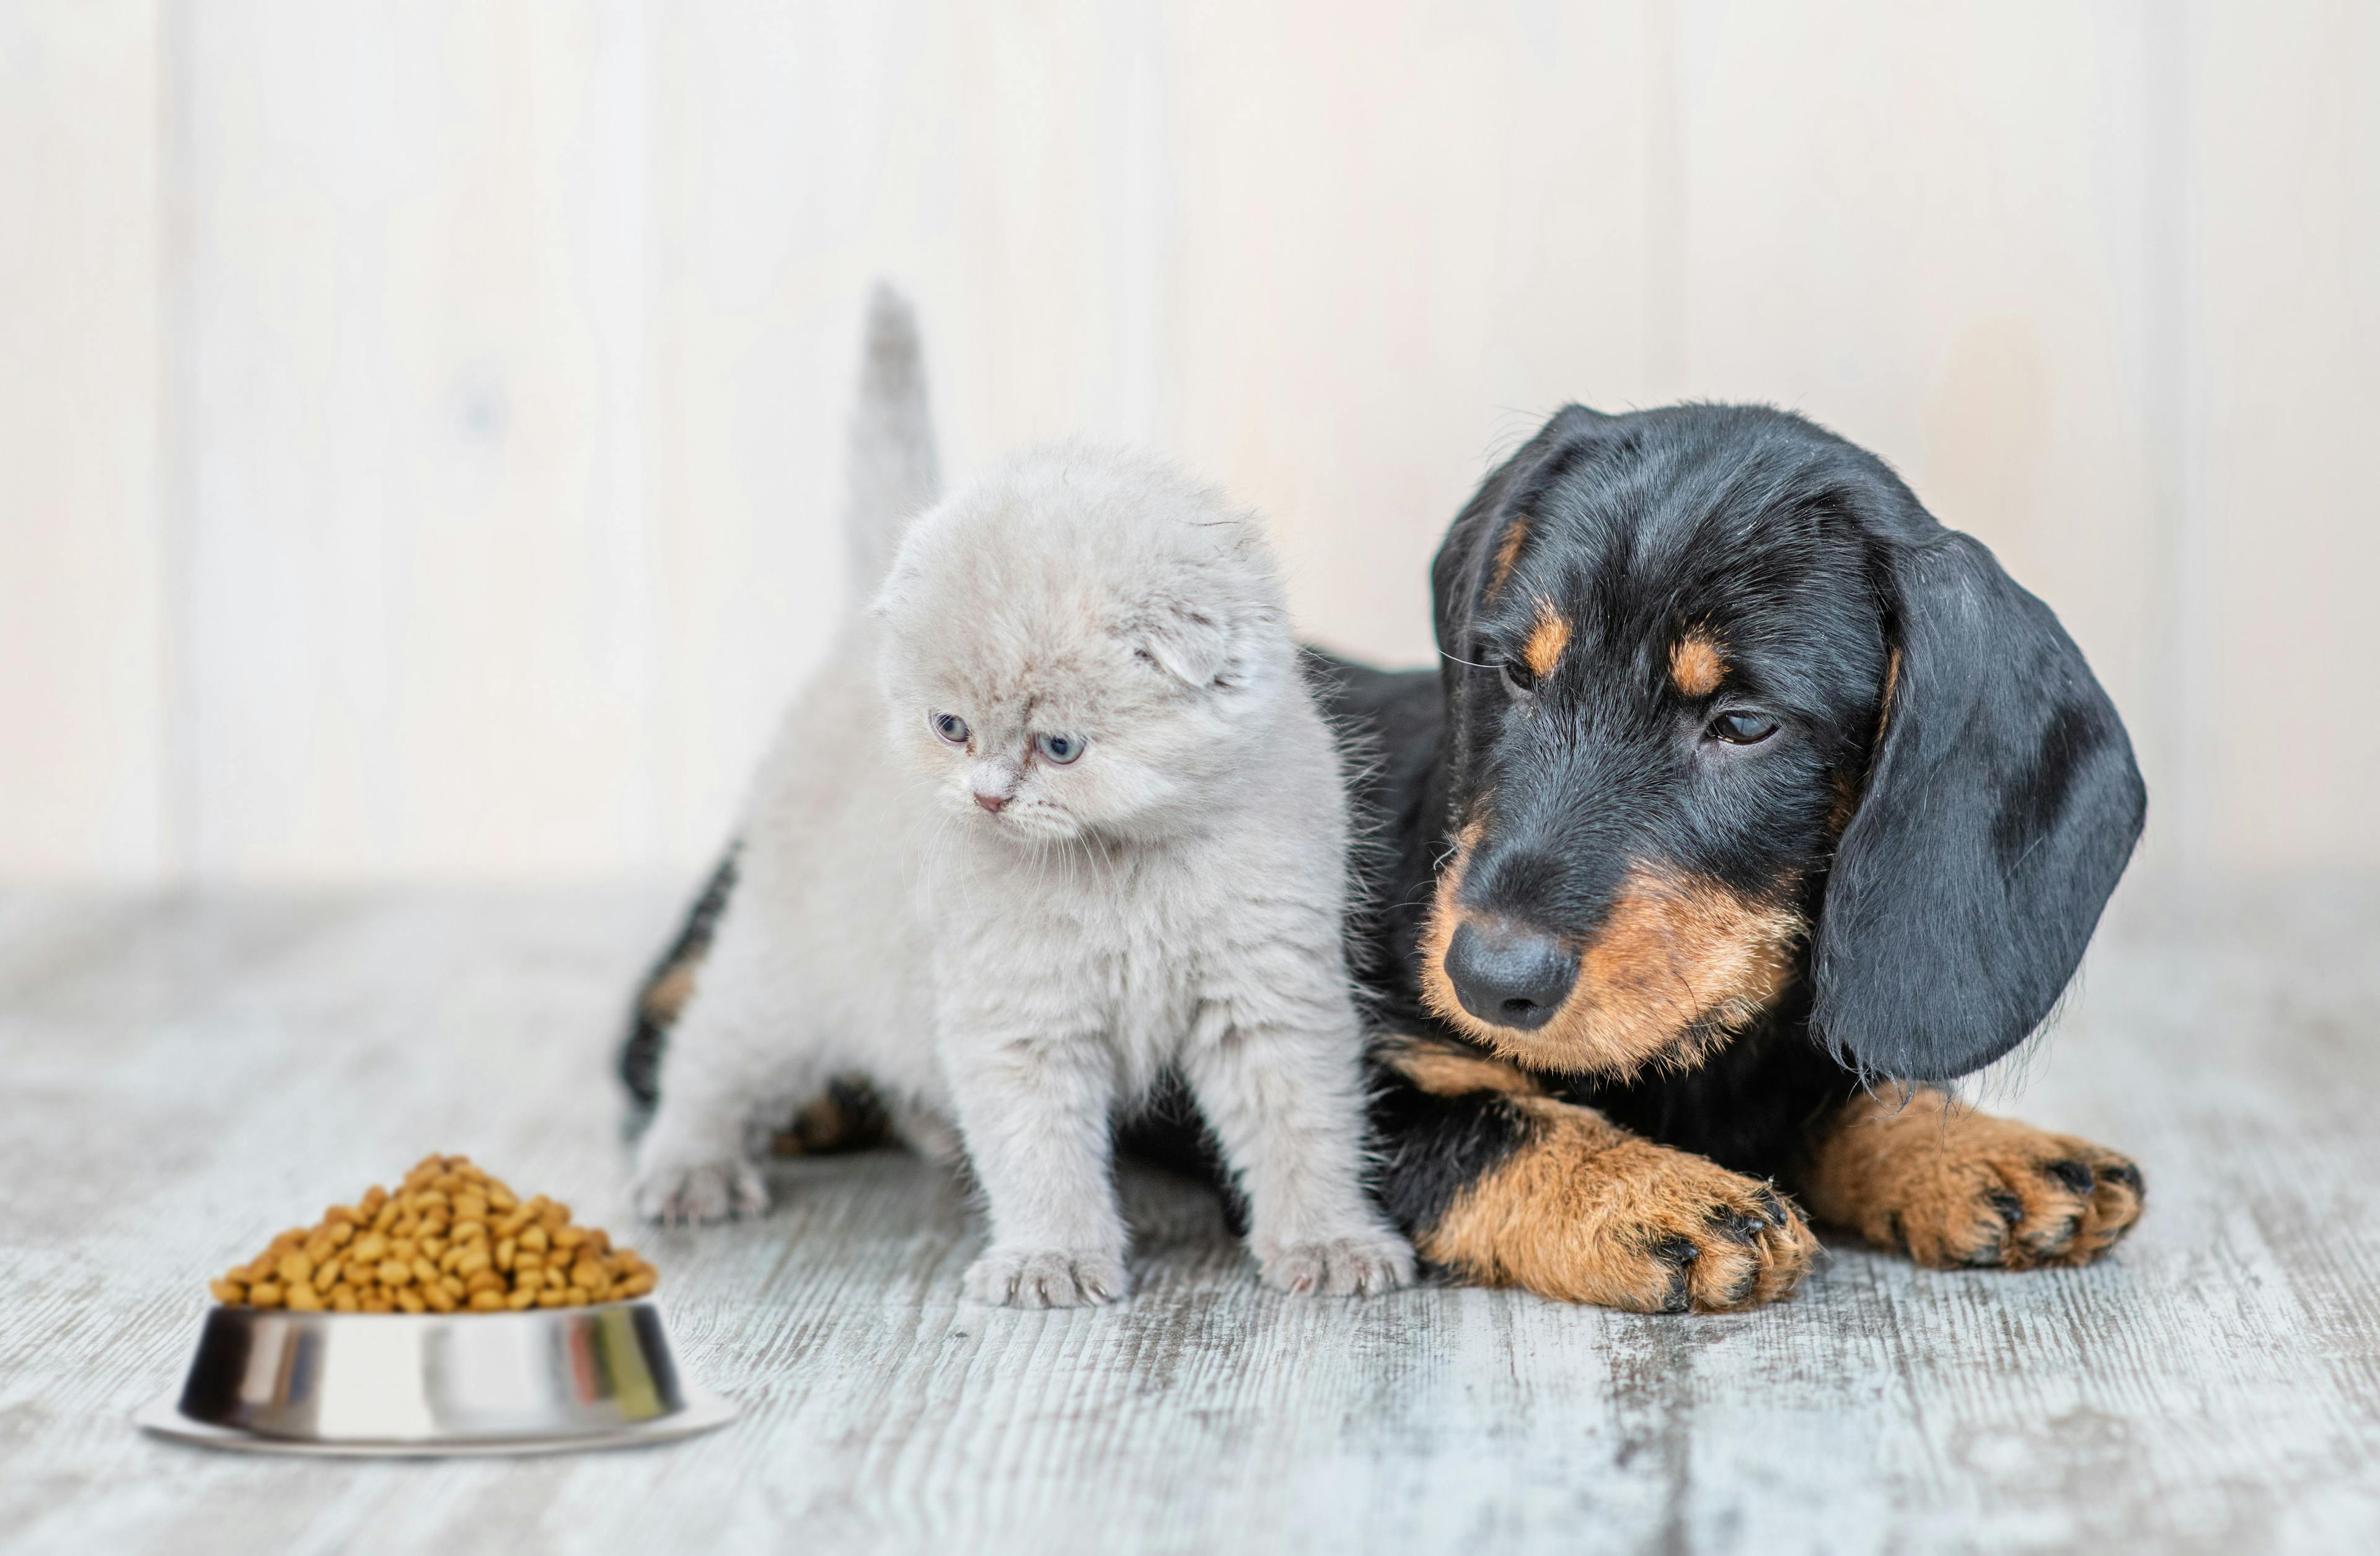 Royal Canin announces expansion of GI diet line